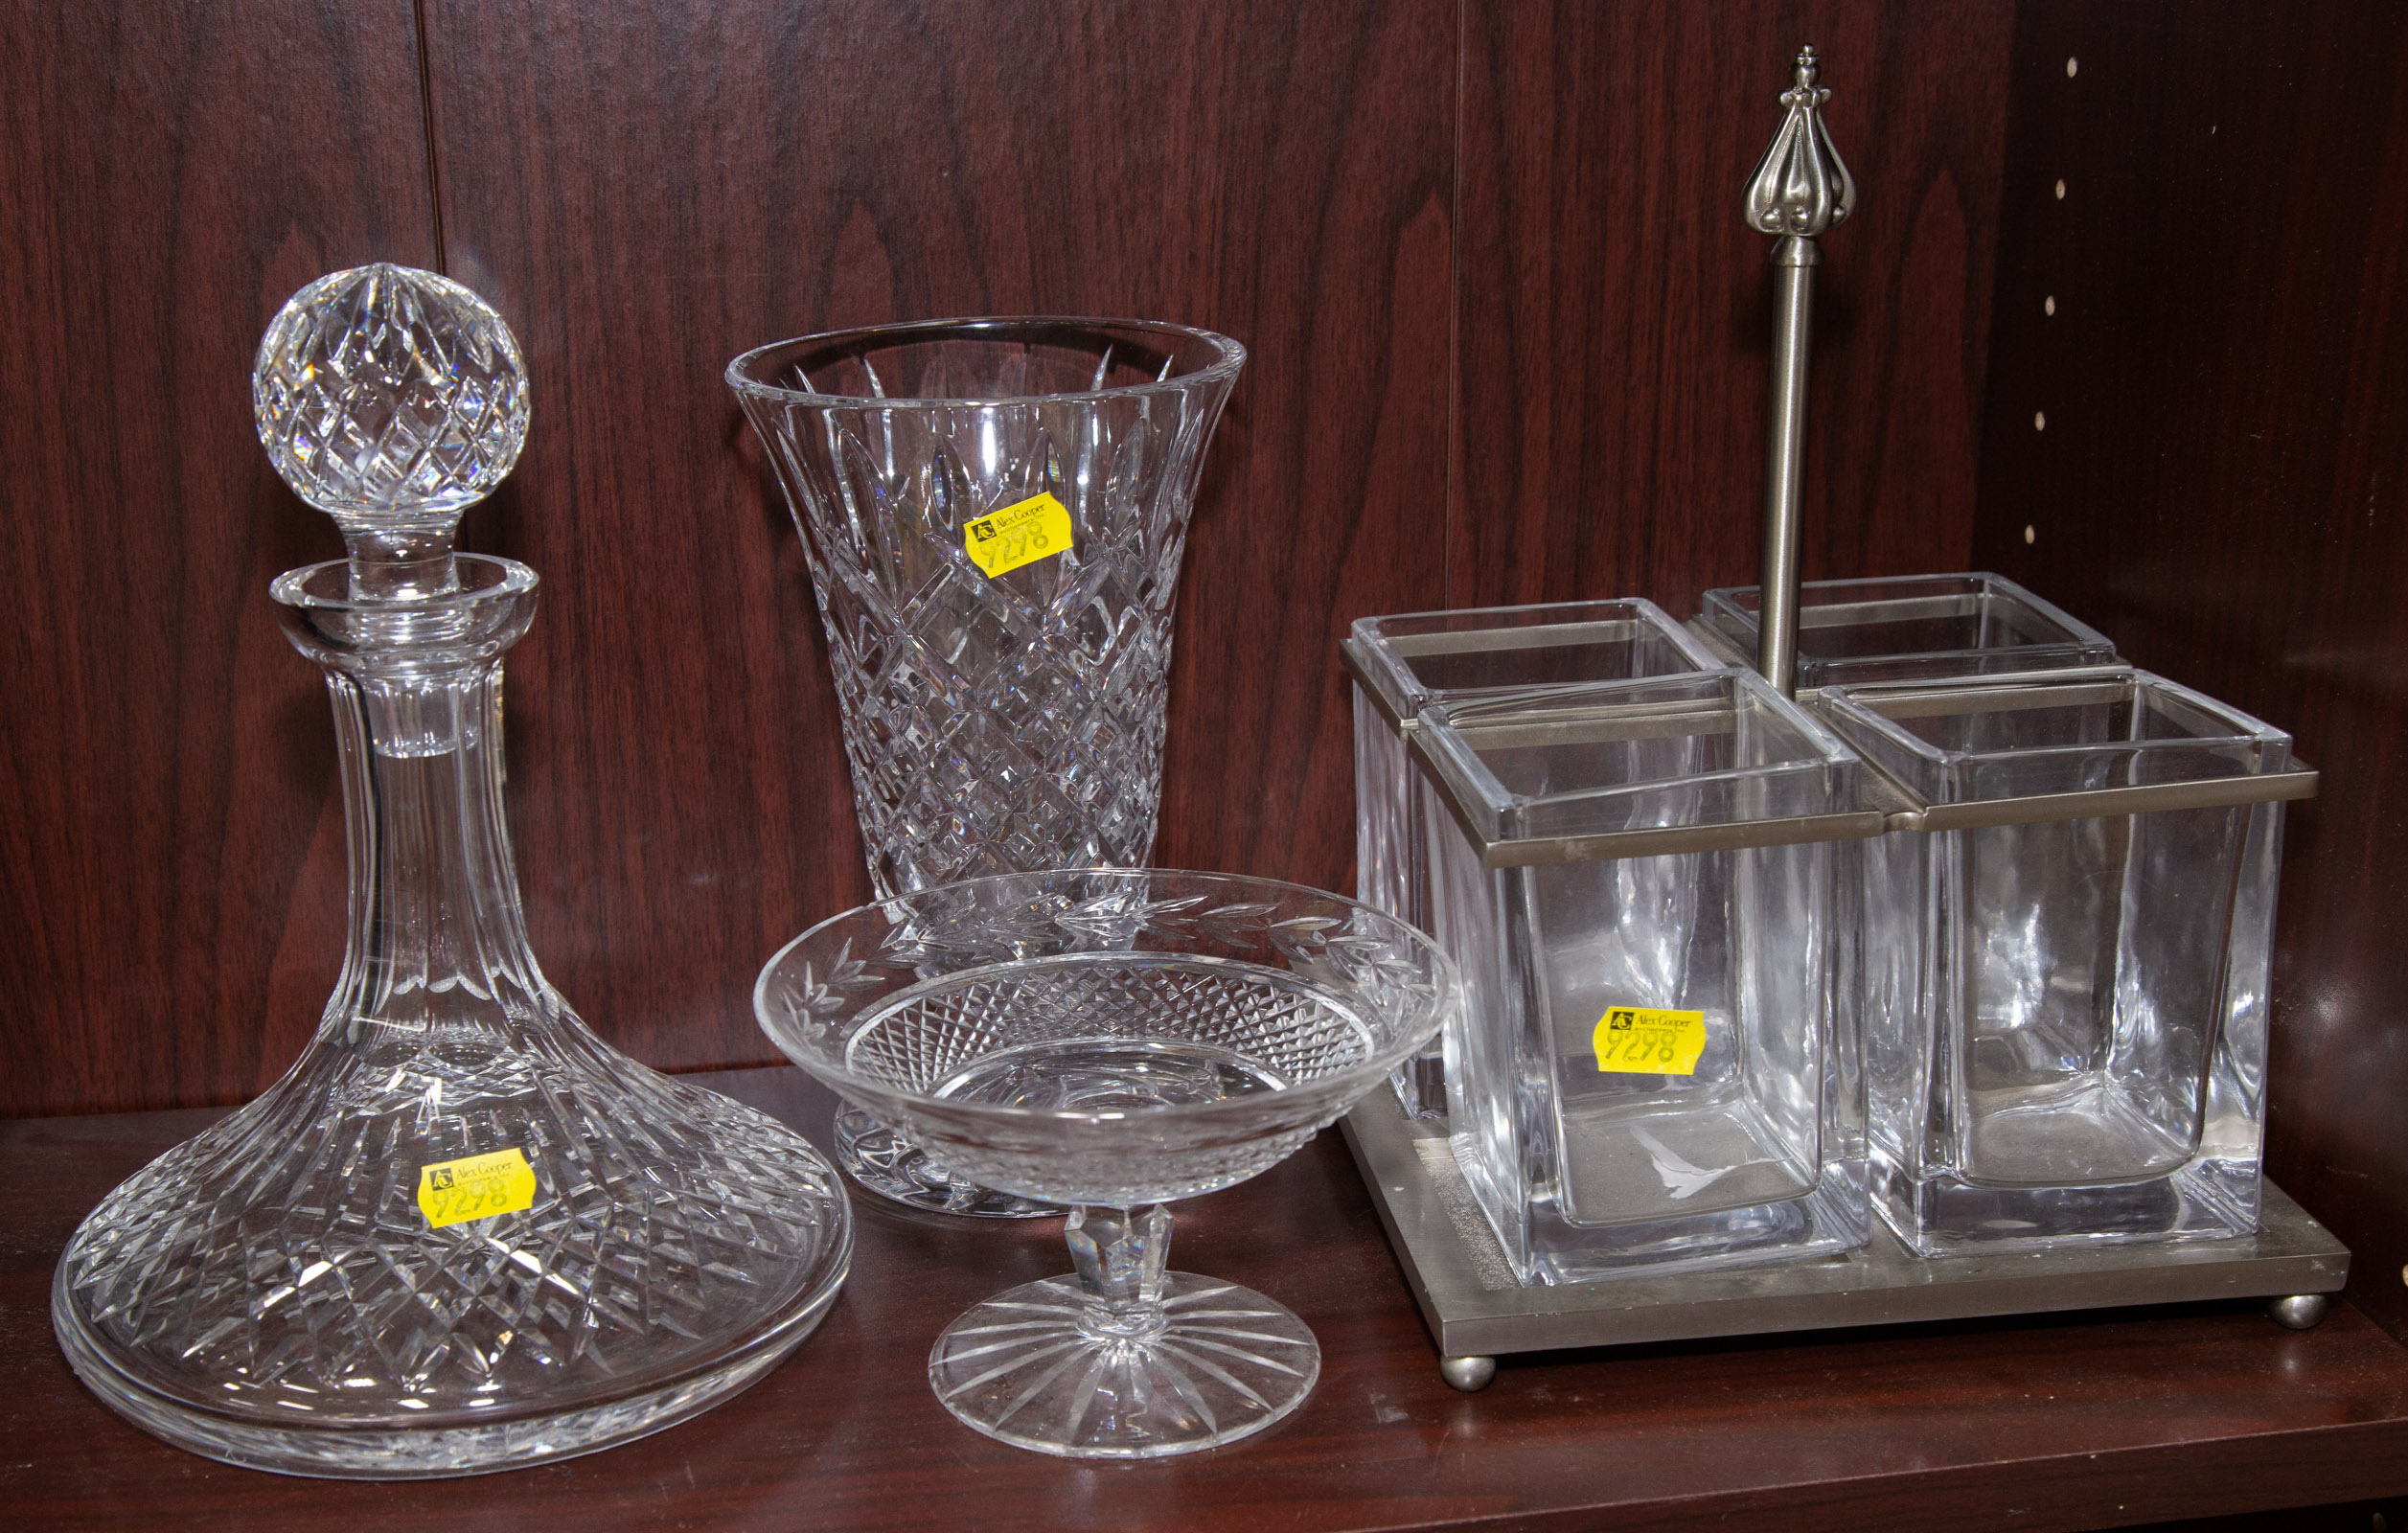 SELECTION OF GLASS TABLEWARE Including 28828a